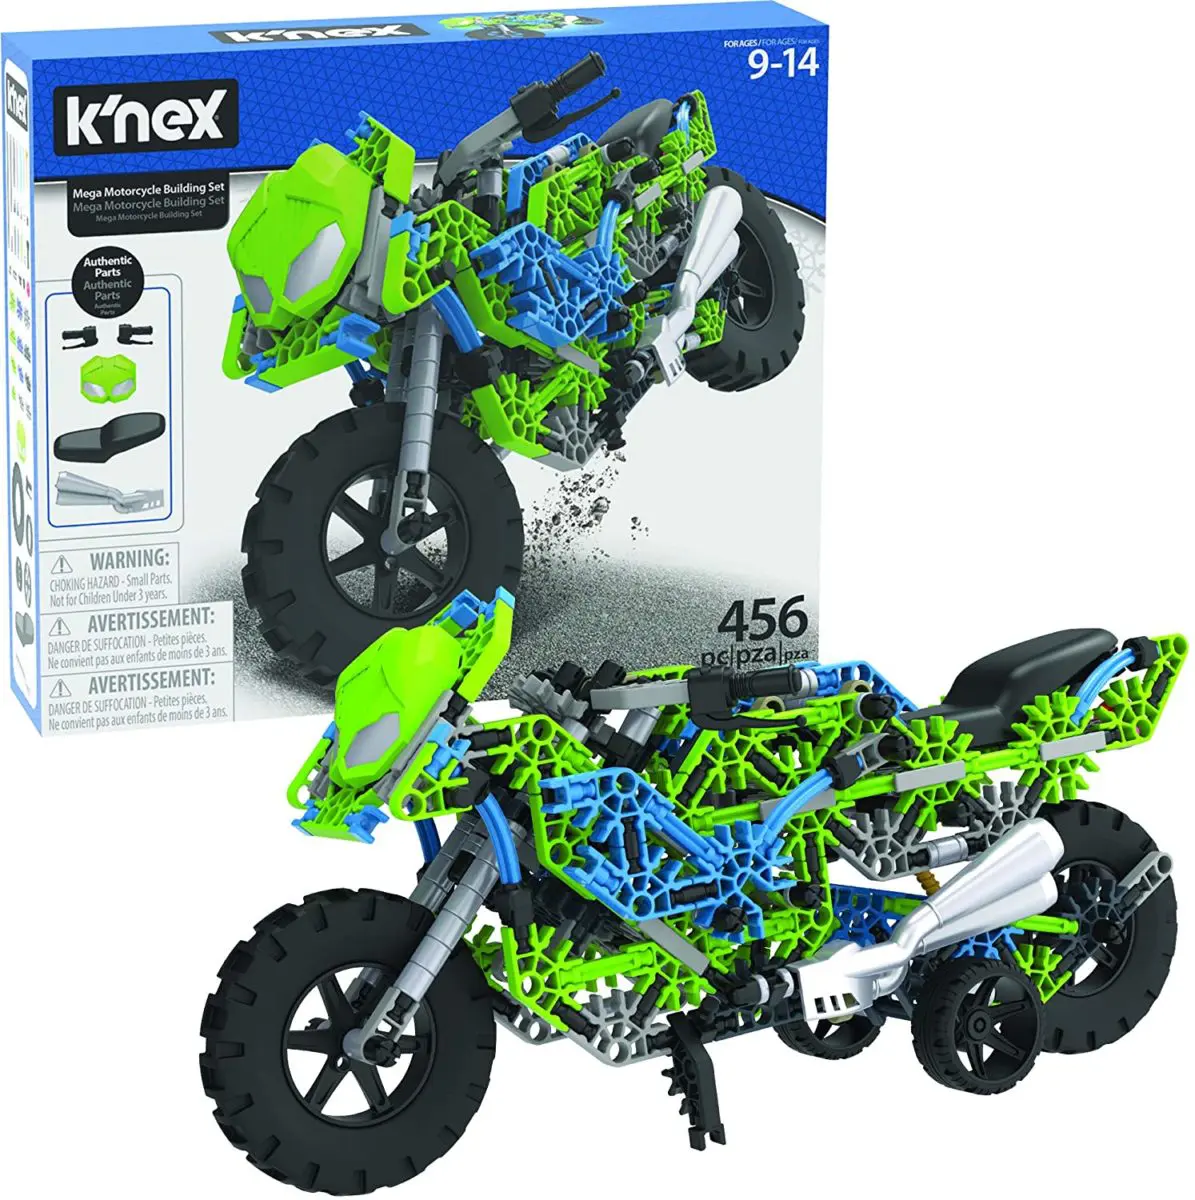 K’NEX Mega Motorcycle Building Set - Top Toys and Gifts for Nine Year Old Boys 1